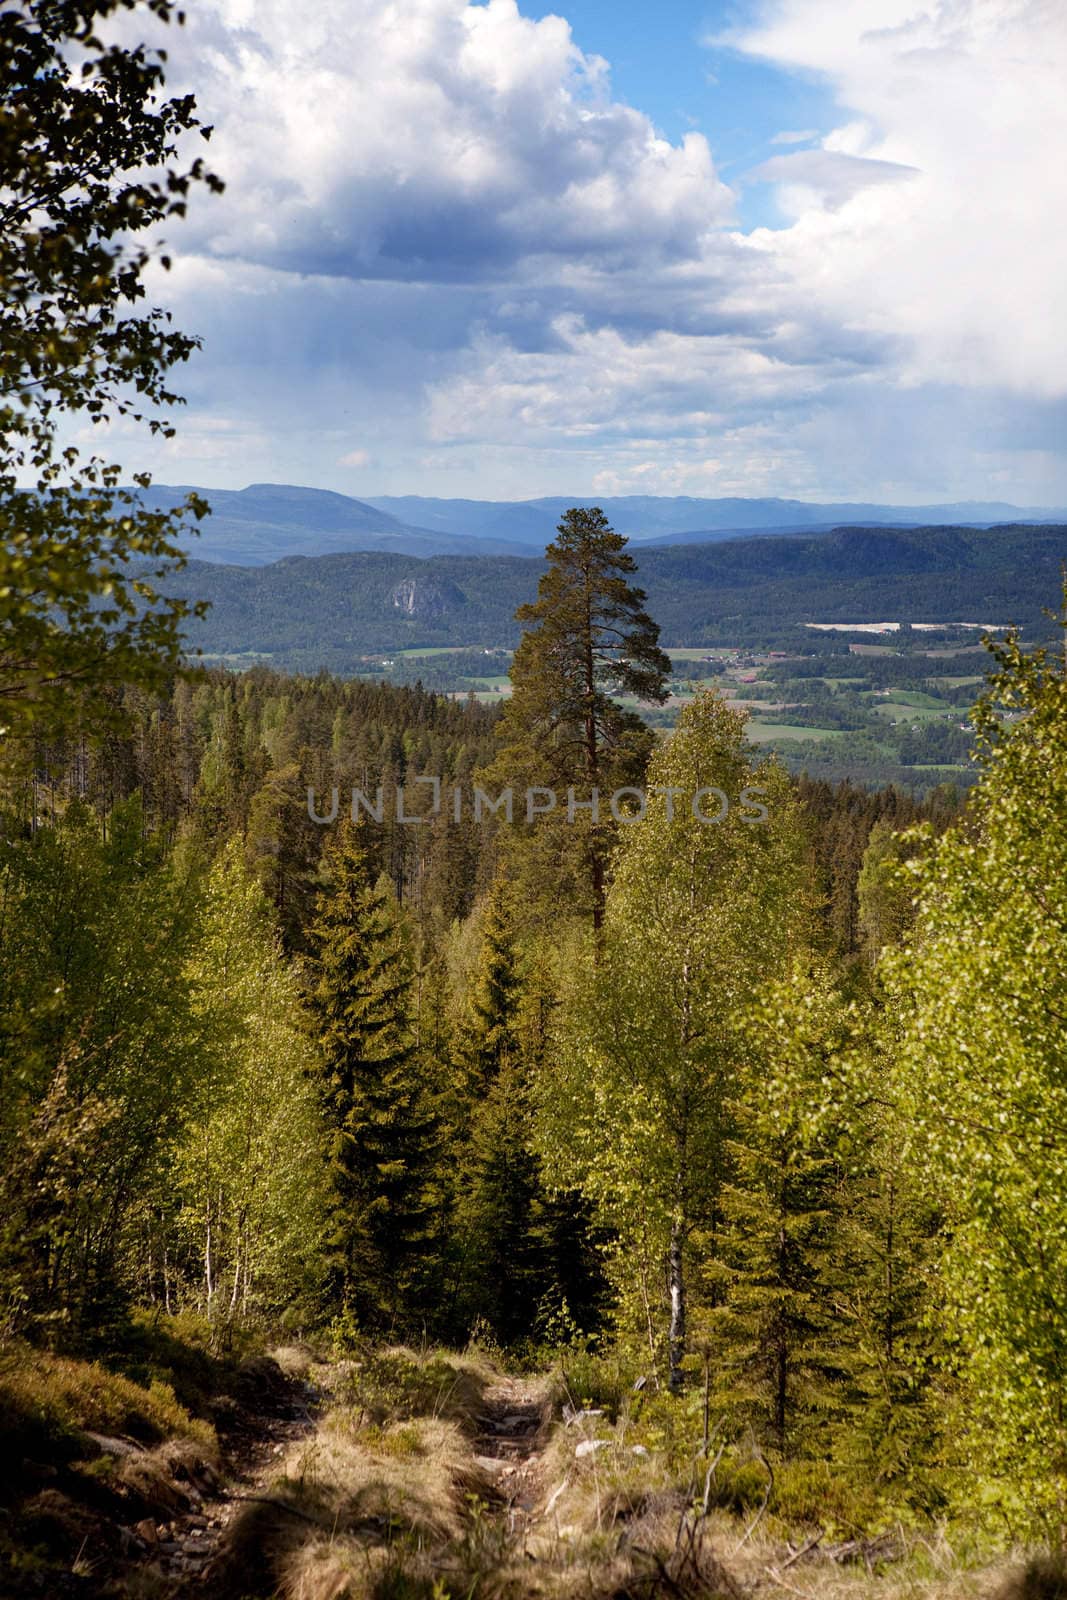 A forest mountain landscape looking over the horizon